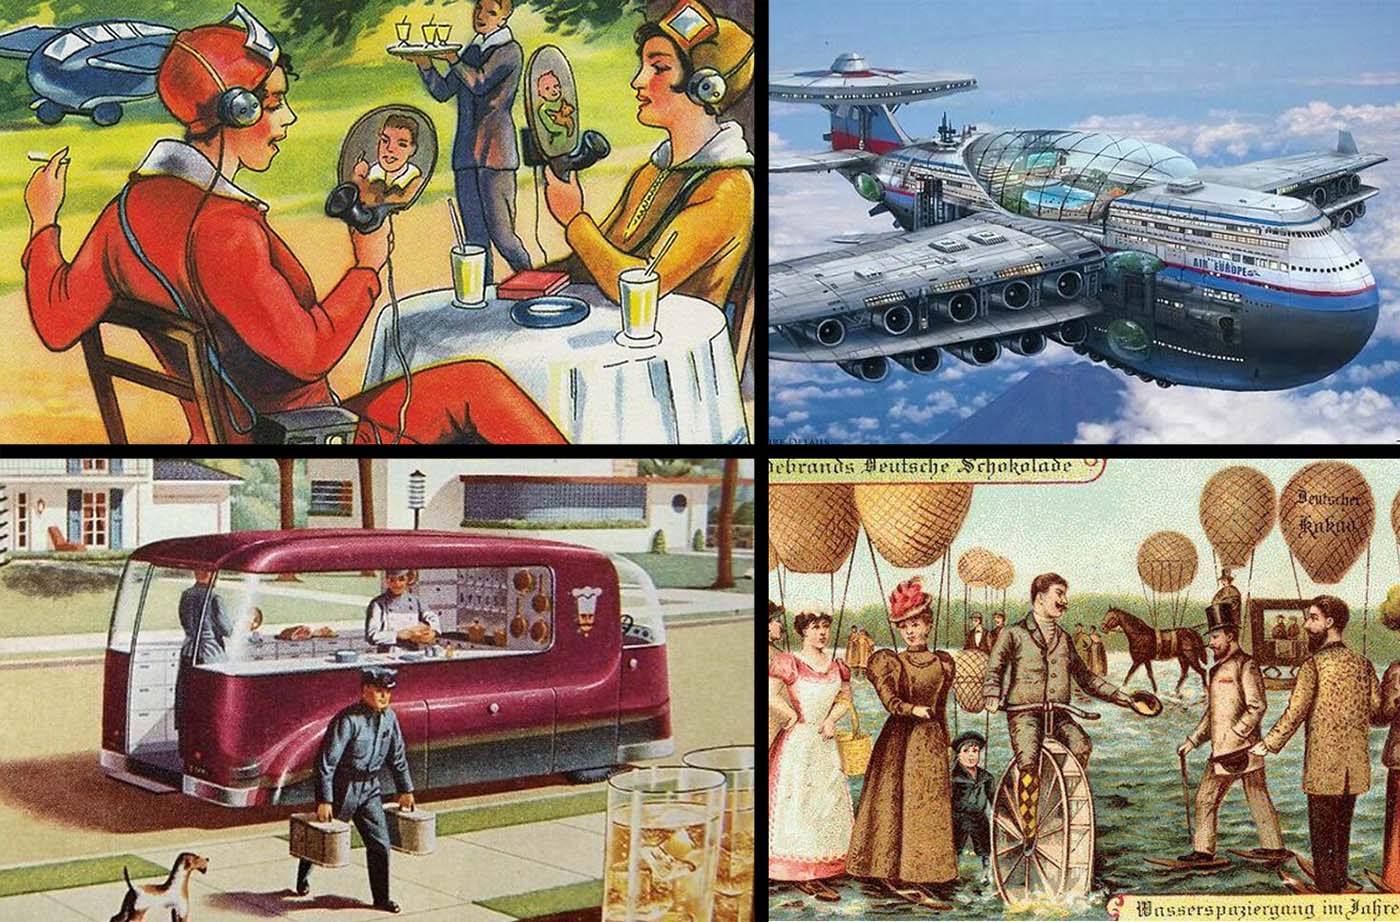 Retro future predictions that shows how people from the past imagined the future, 1900s-1960s